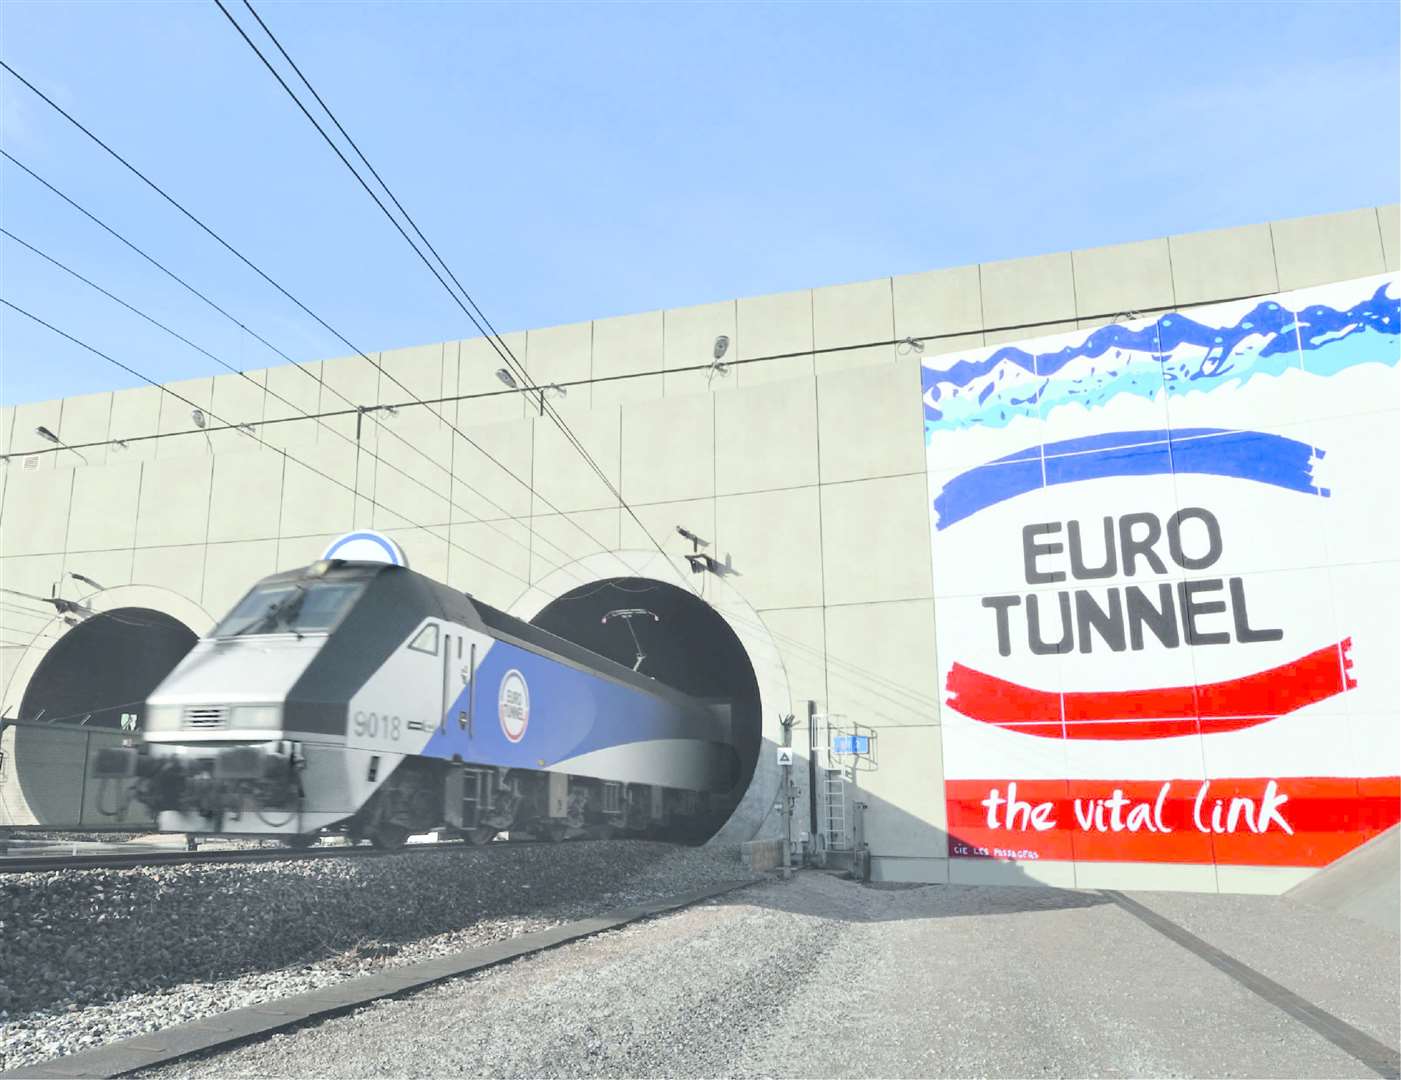 Eurotunnel says it is 'ready' for Brexit - whatever form it takes